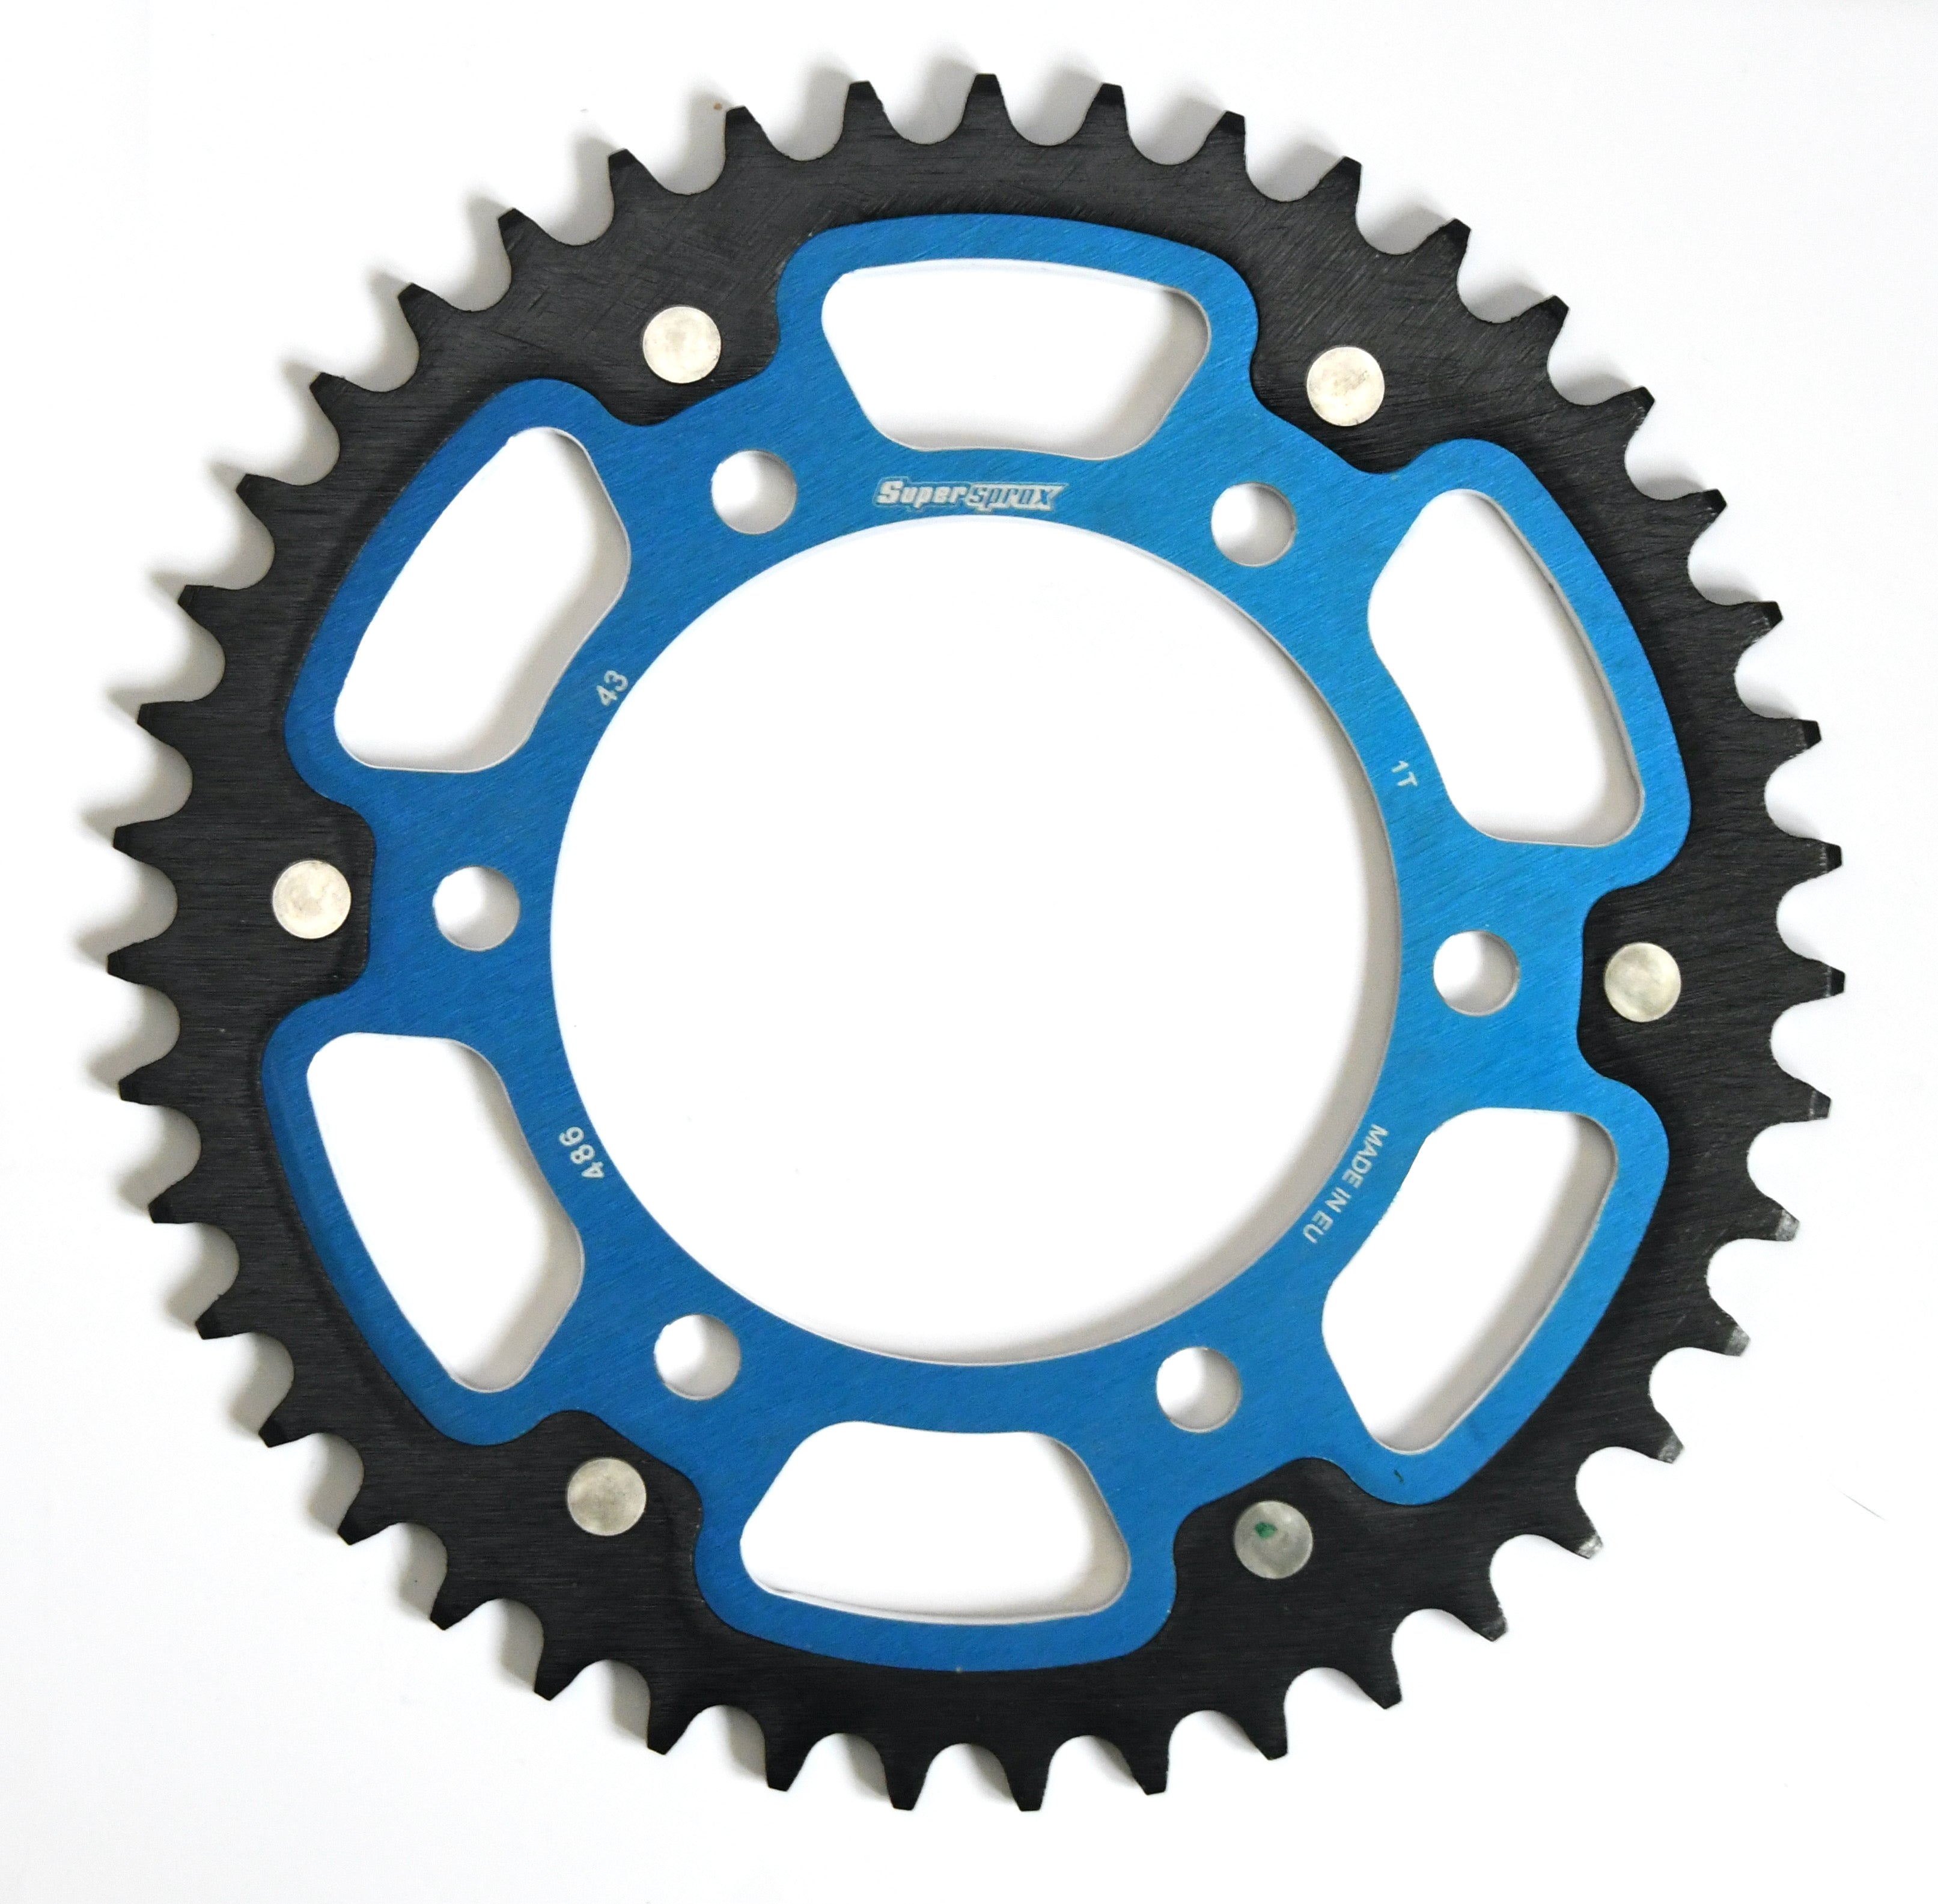 Supersprox Stealth Sprocket RST-486 - 520 Conversion - Choose Your Gearing